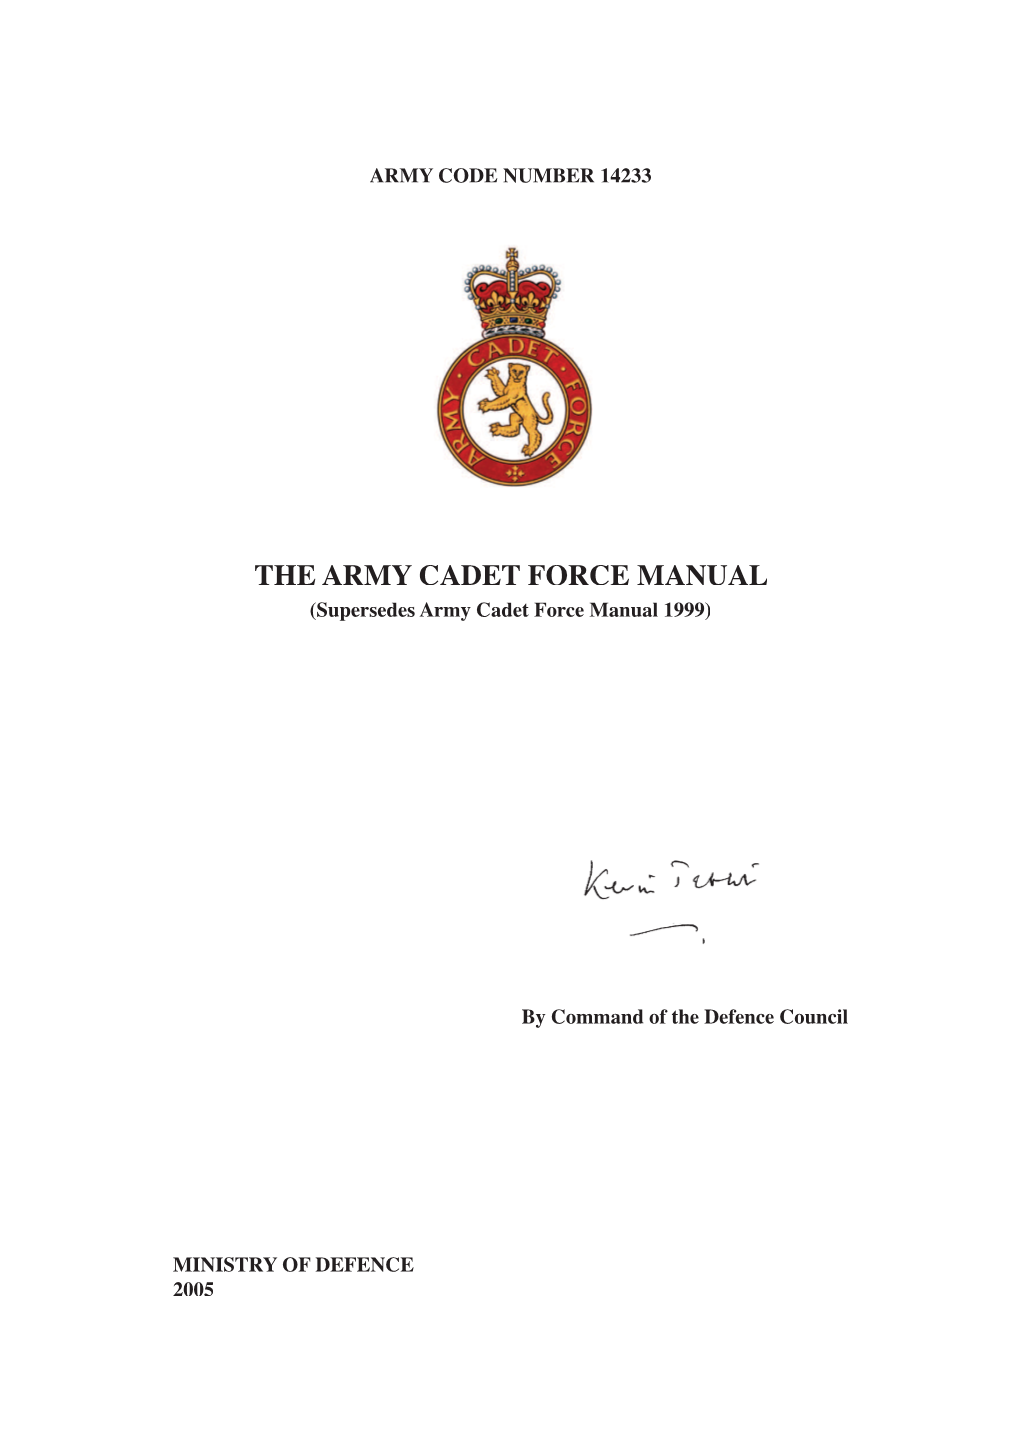 THE ARMY CADET FORCE MANUAL (Supersedes Army Cadet Force Manual 1999)